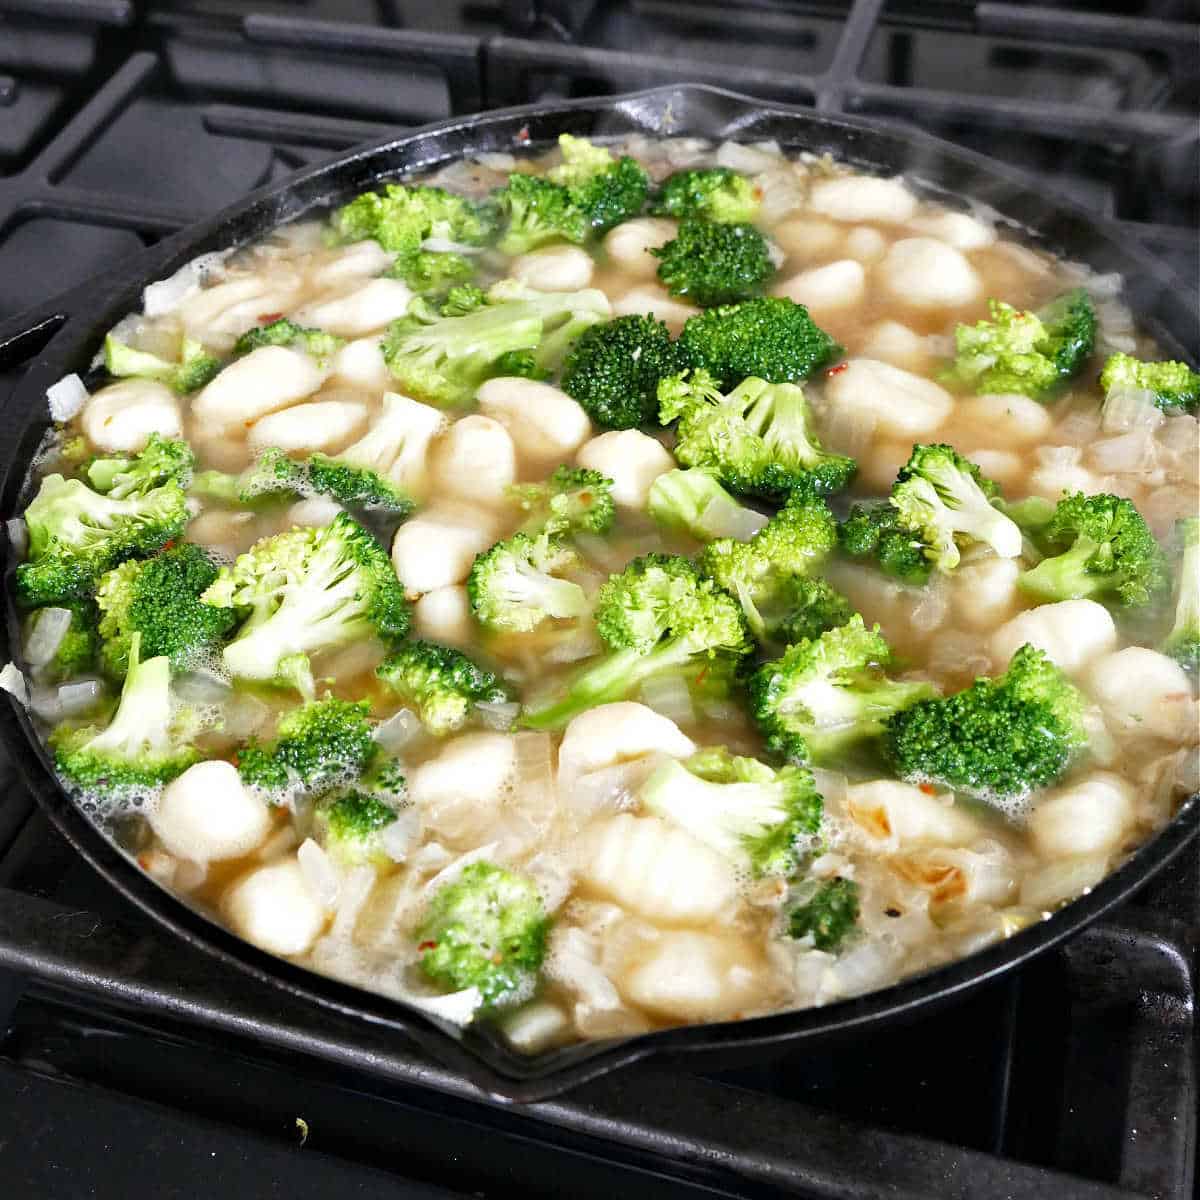 ingredients for gnocchi and broccoli cooking in a cast iron skillet on a stove